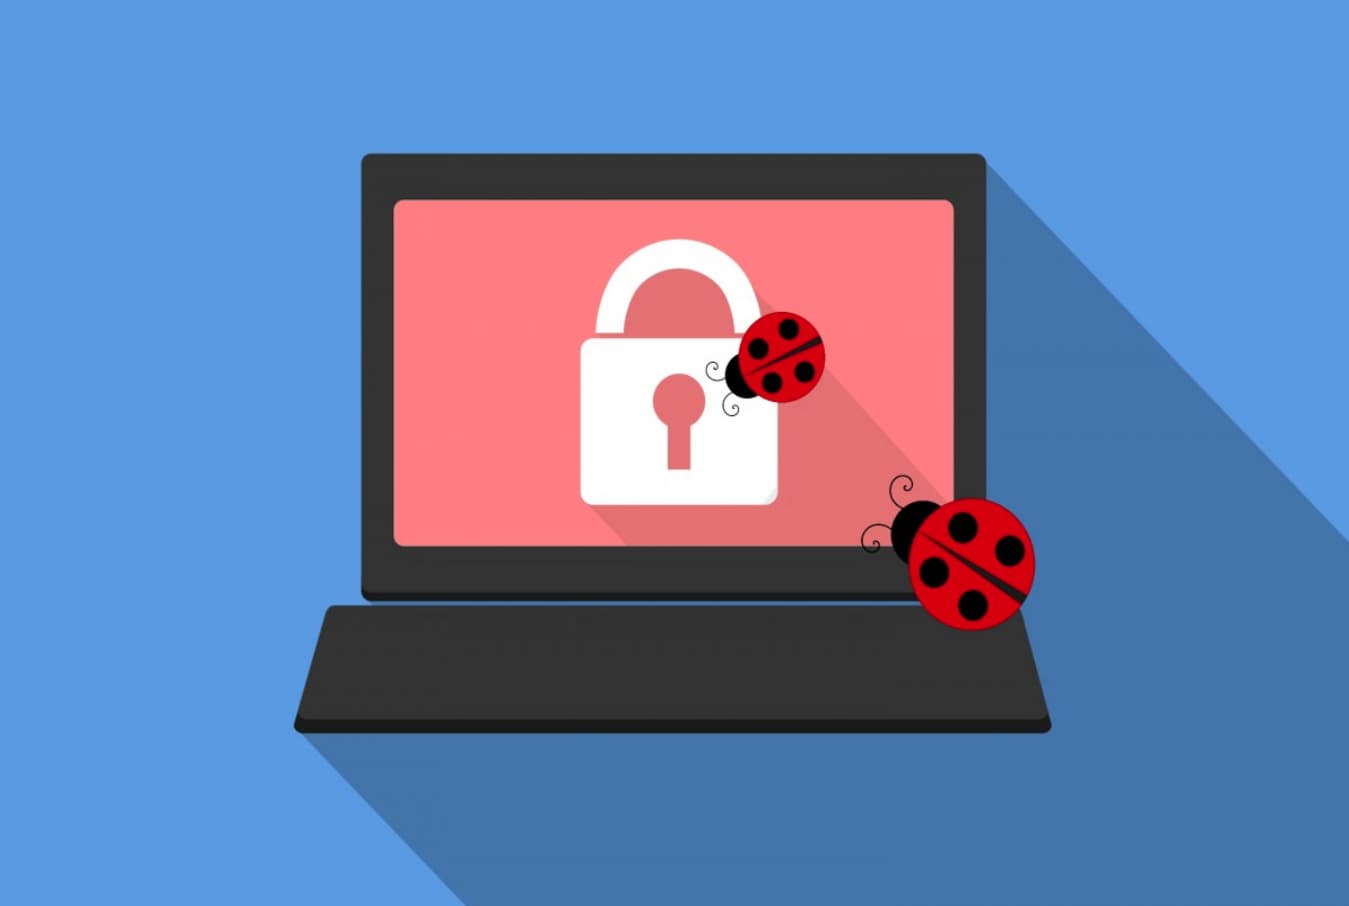 How can I protect myself from hackers if I want to start a blog?